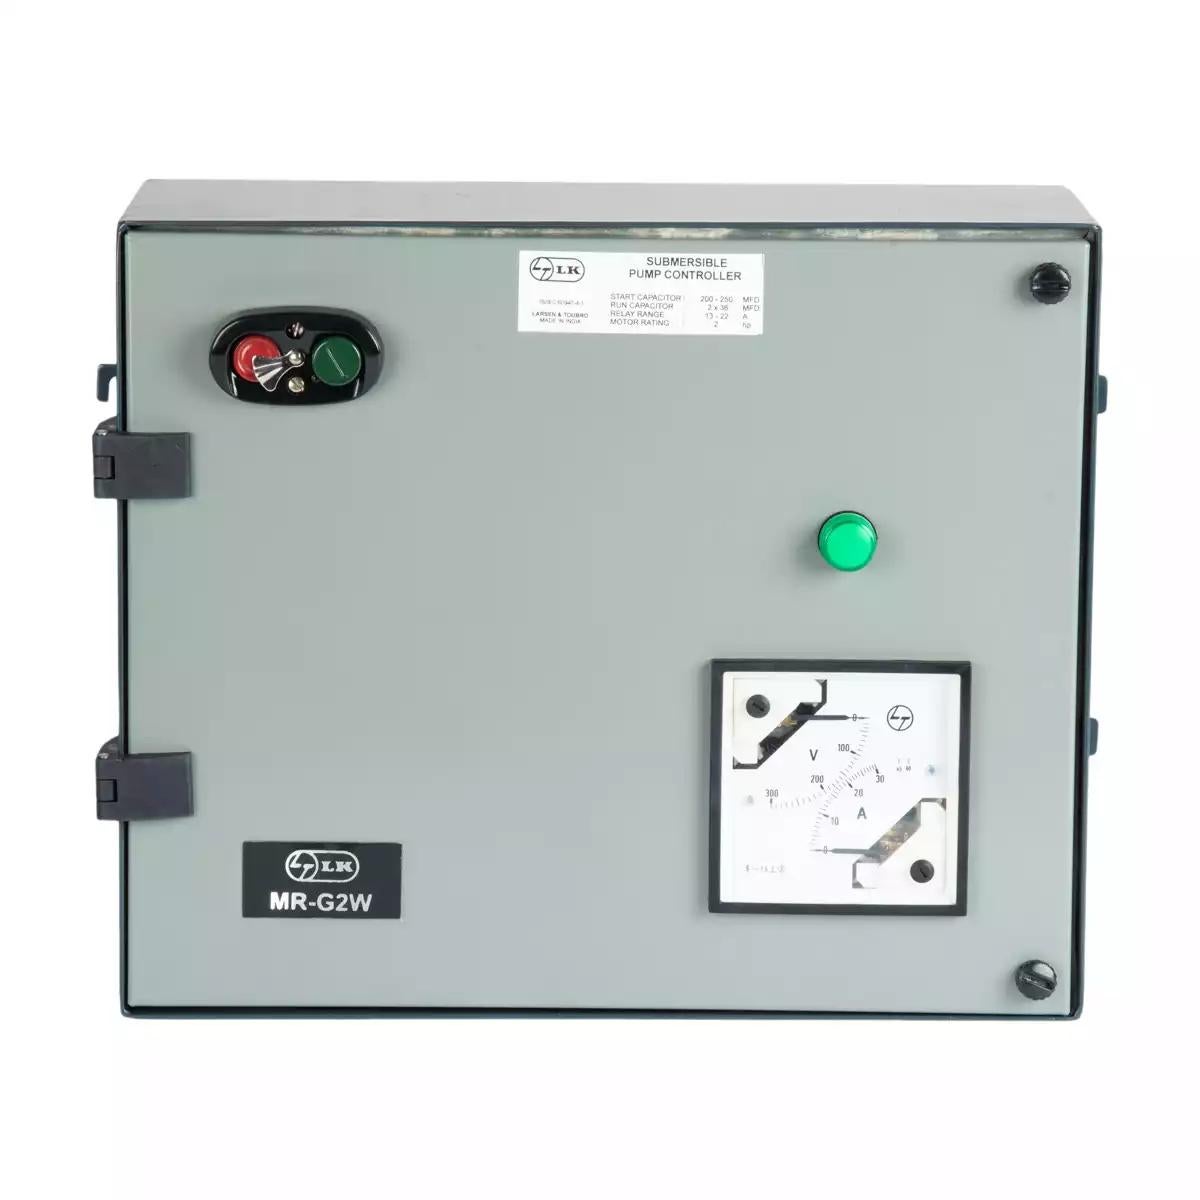 Single Phase Controller with WLC for Submersible Pump Application,MR-G2W,1HP,120 / 150mfd,1 x 36mfd (CS91041BCVE)